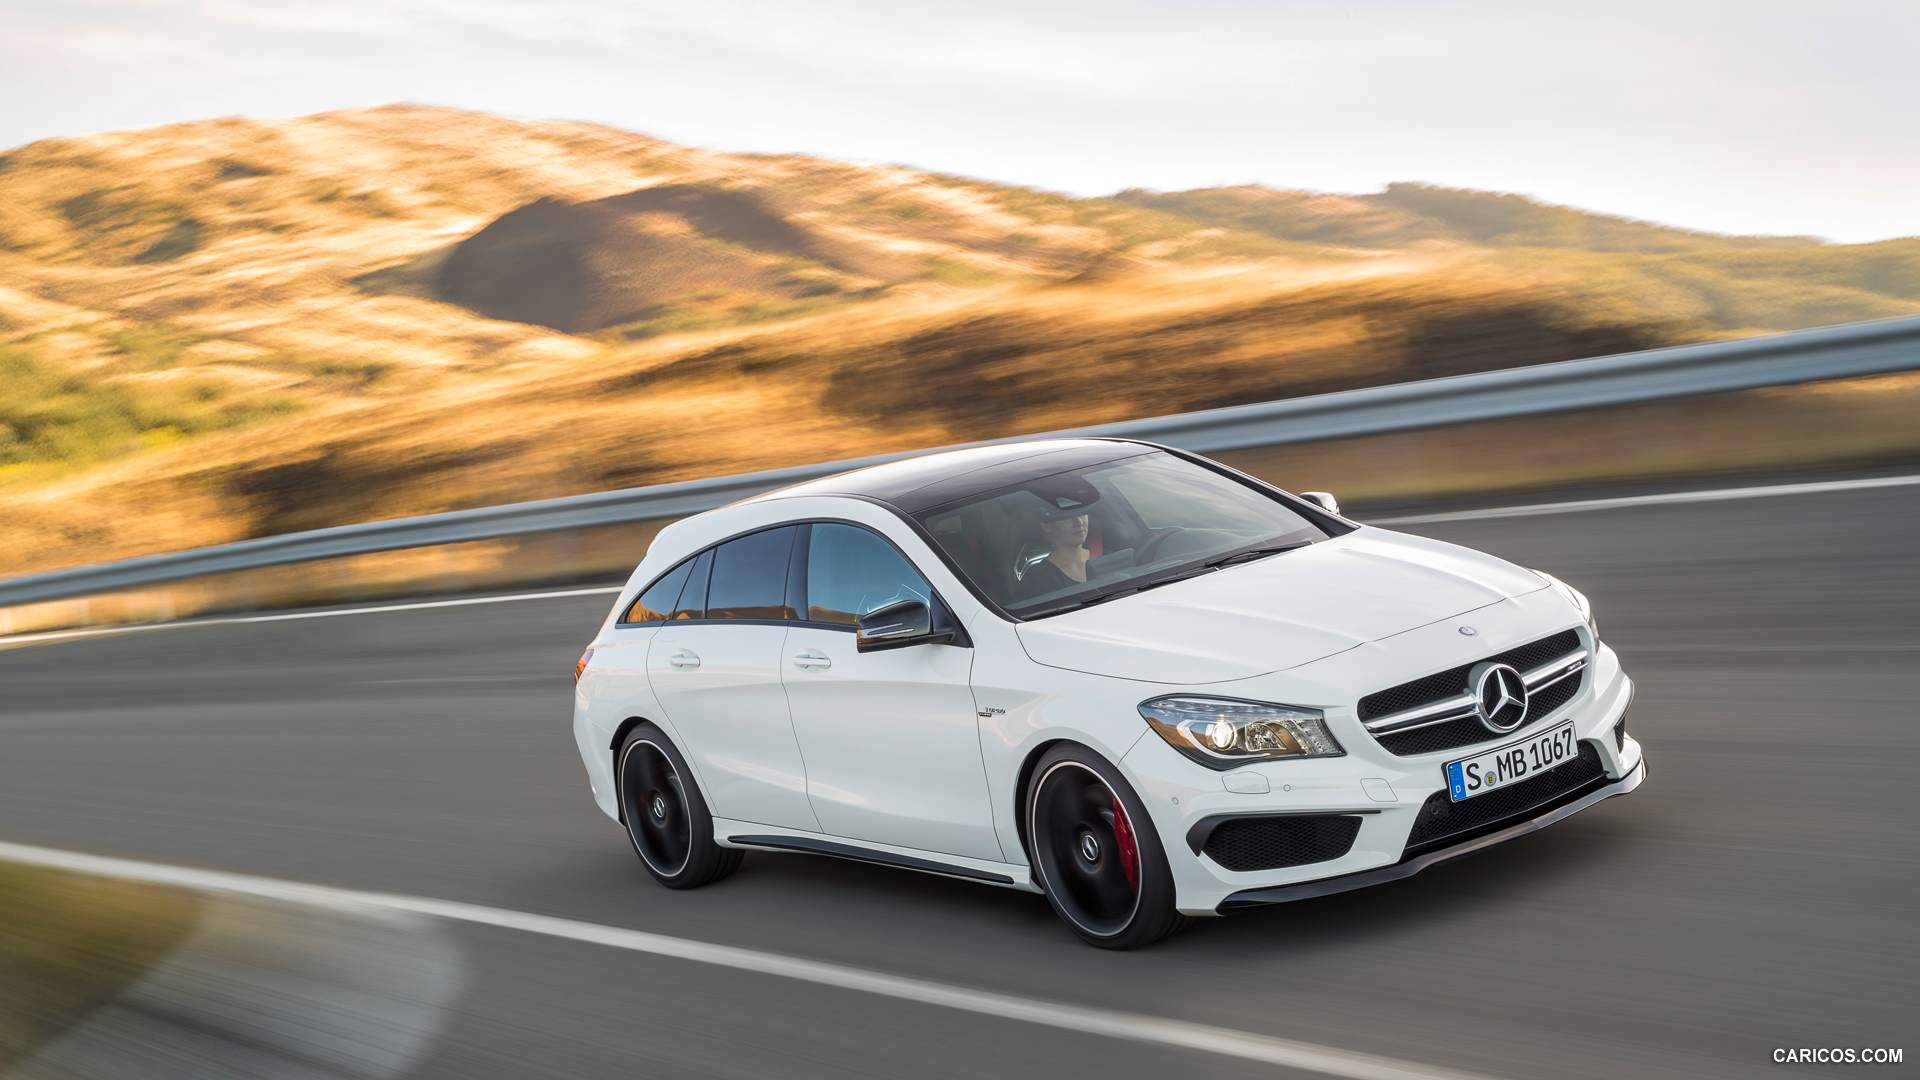 2015 Mercedes-Benz CLA 45 AMG Shooting Brake (Calcite White)  - Front, #5 of 70